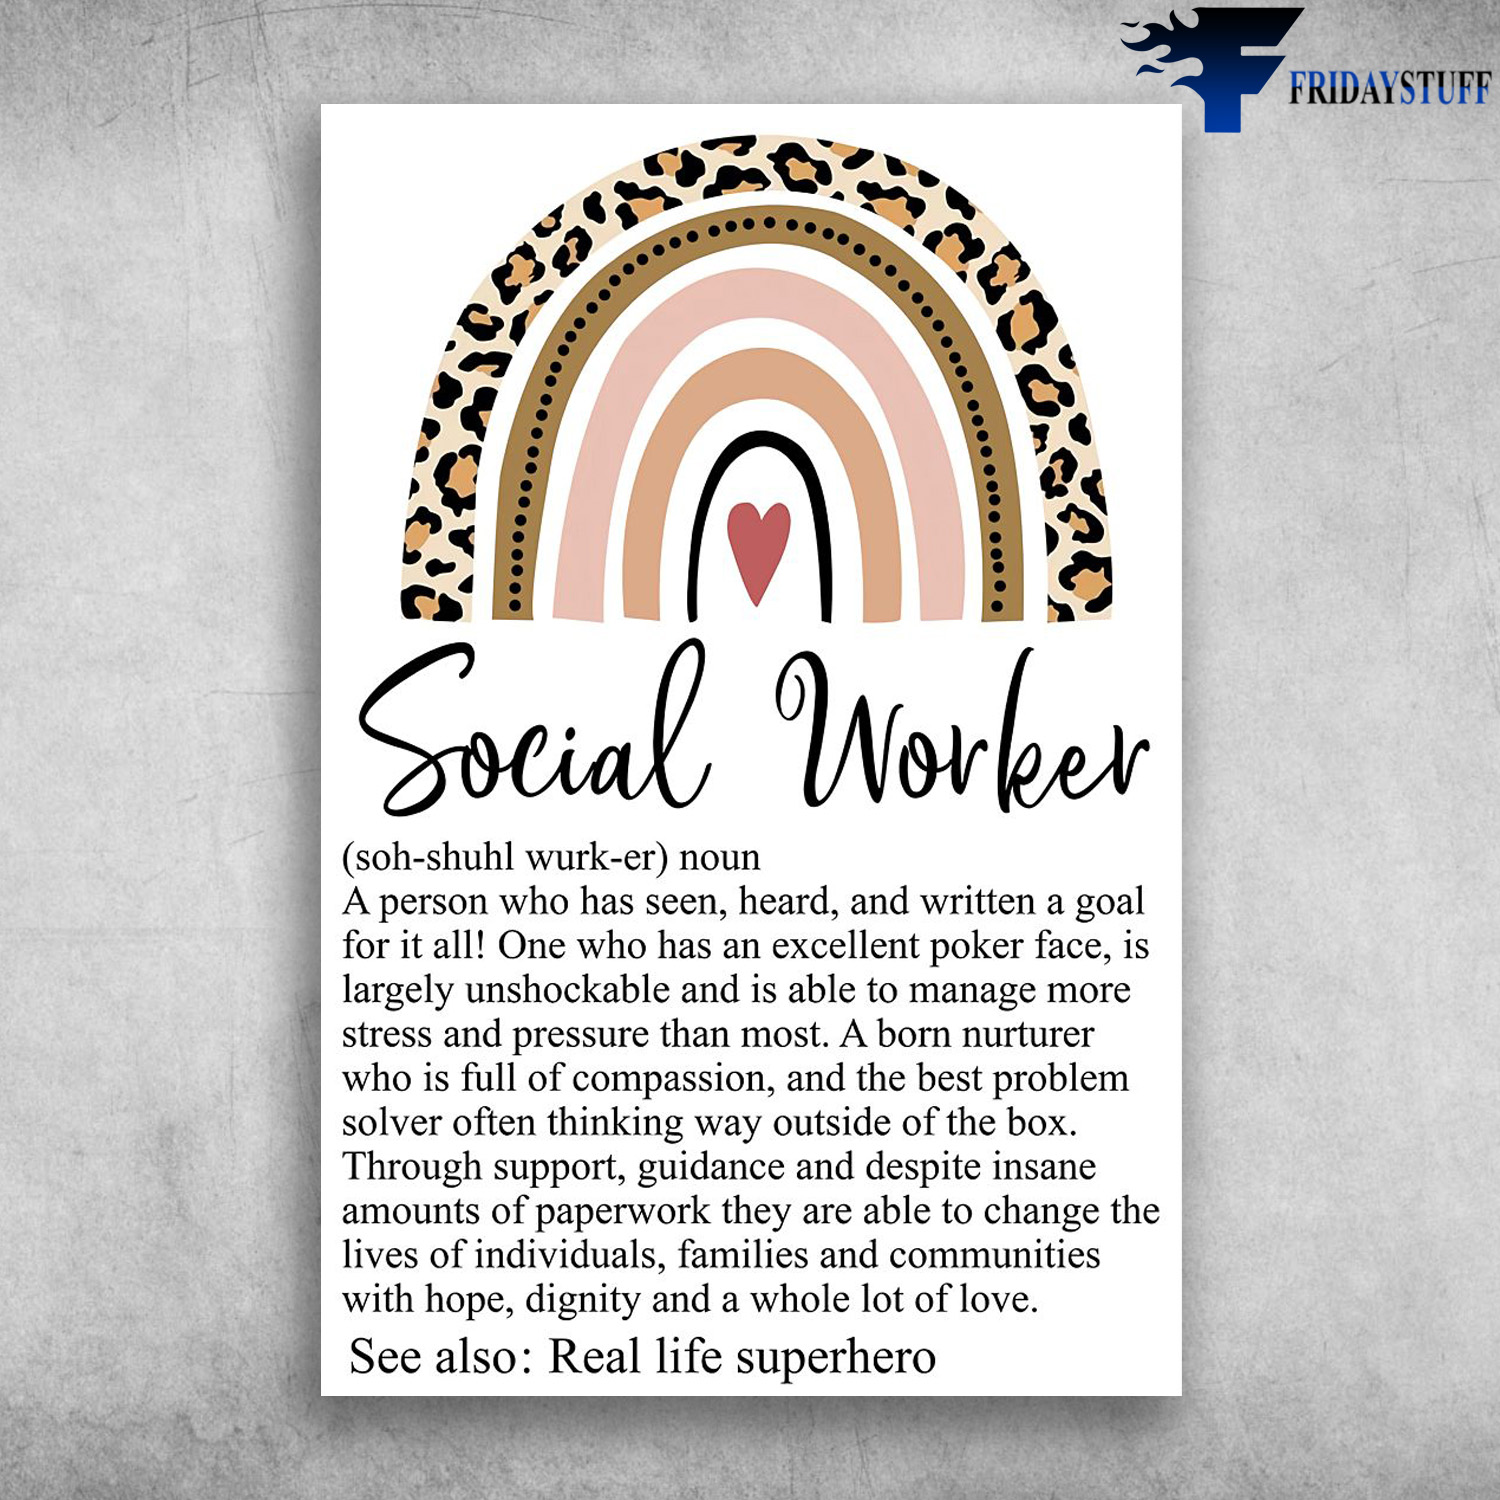 Social Worker - A Person Who Has Seen, Heard, And Written A Goal For It All, One Who Has An Excellent Poler Face, Is Largelt Unshockable And Is Able To Manage More Stress And Pressure Than Most